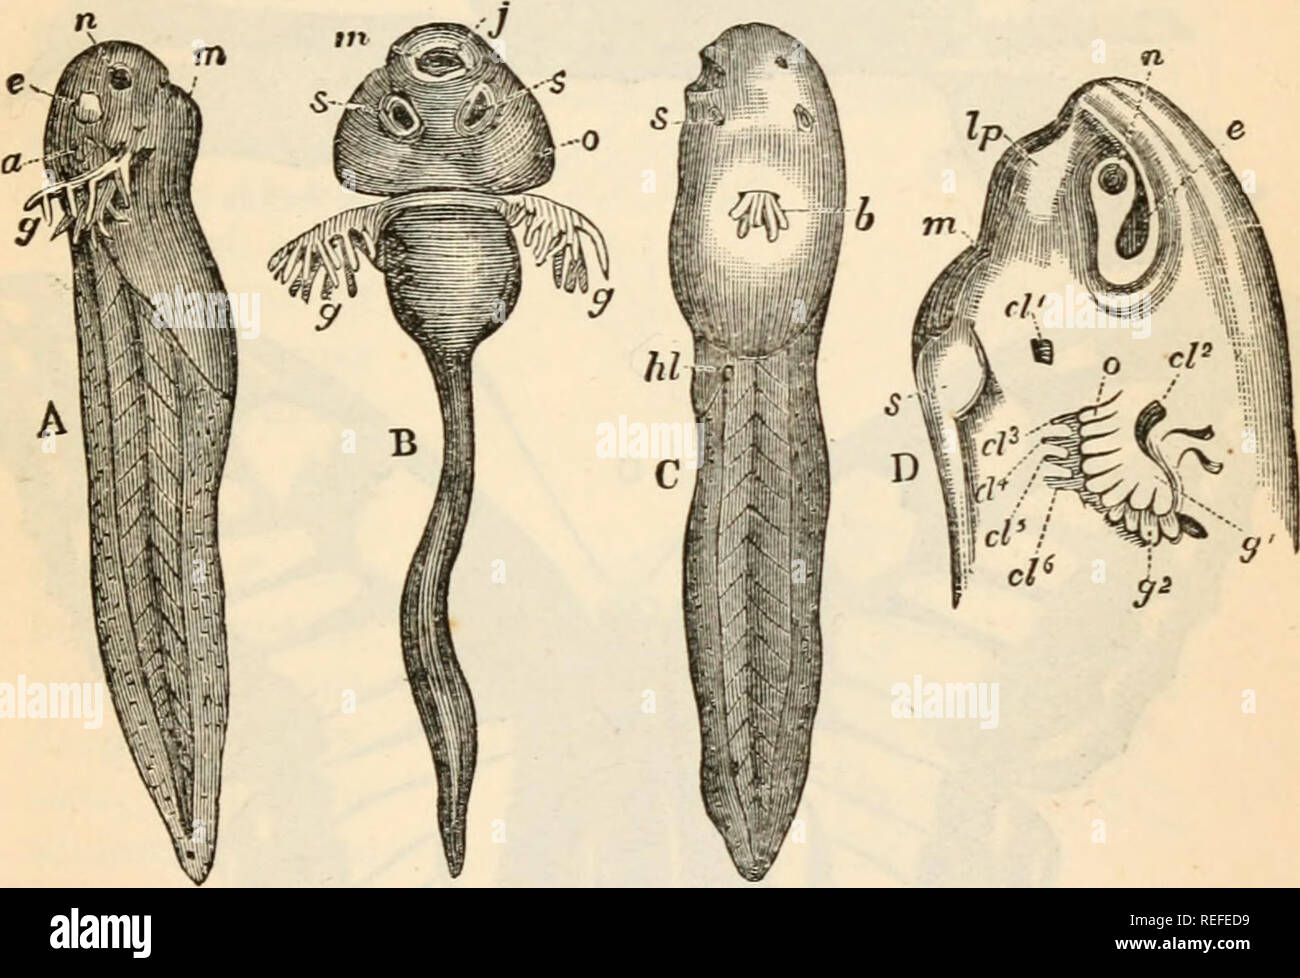 Comparative anatomy and physiology. Chap. XIV.] TADPOLES. clefts, we have a  creature with a long tail, a sucking mouth with horny jaws, and two suckers  below, and with external gills. In